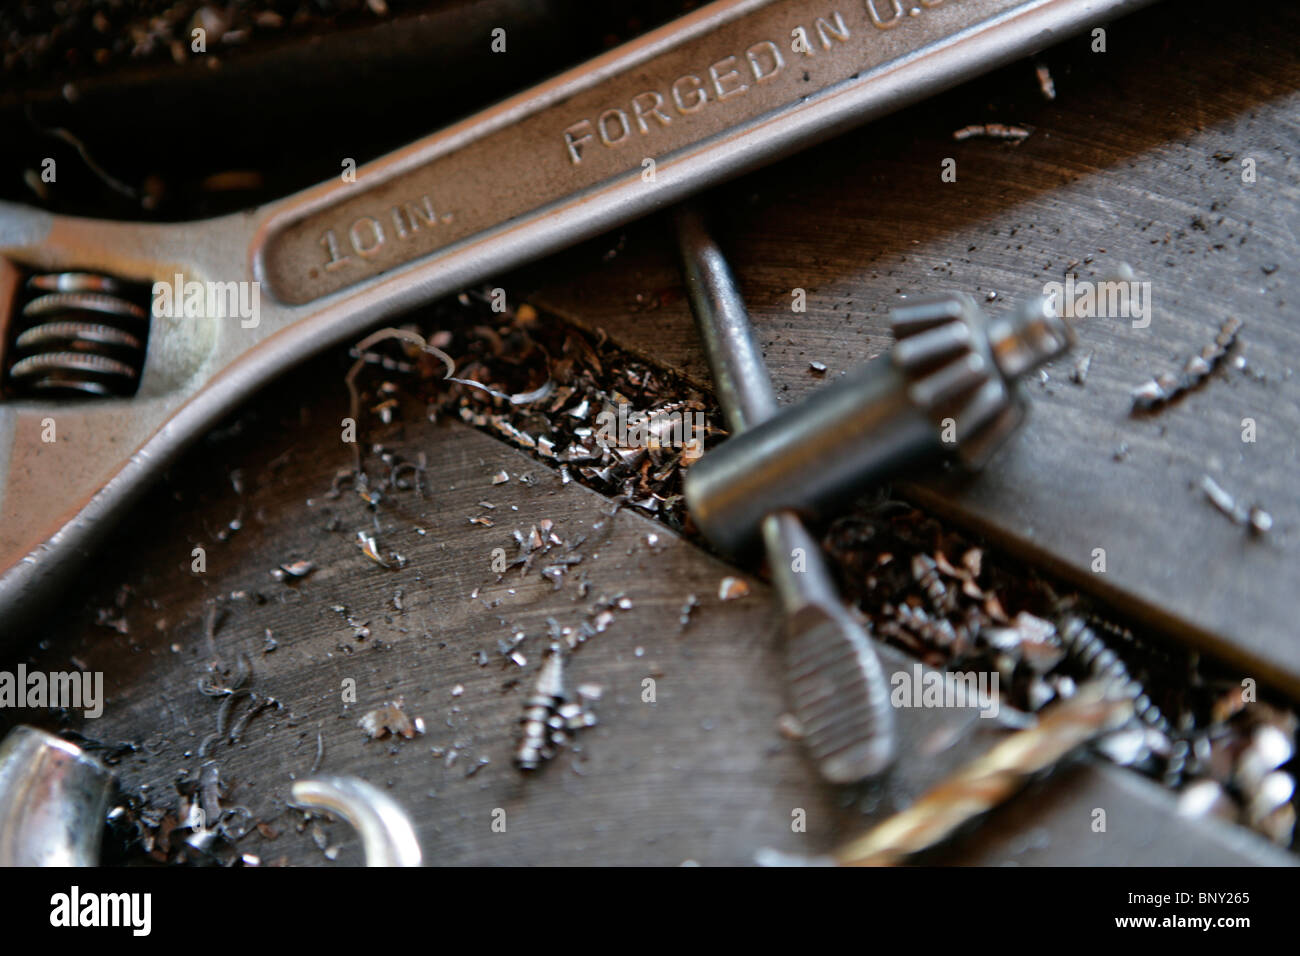 Tools in a metal workshop Stock Photo